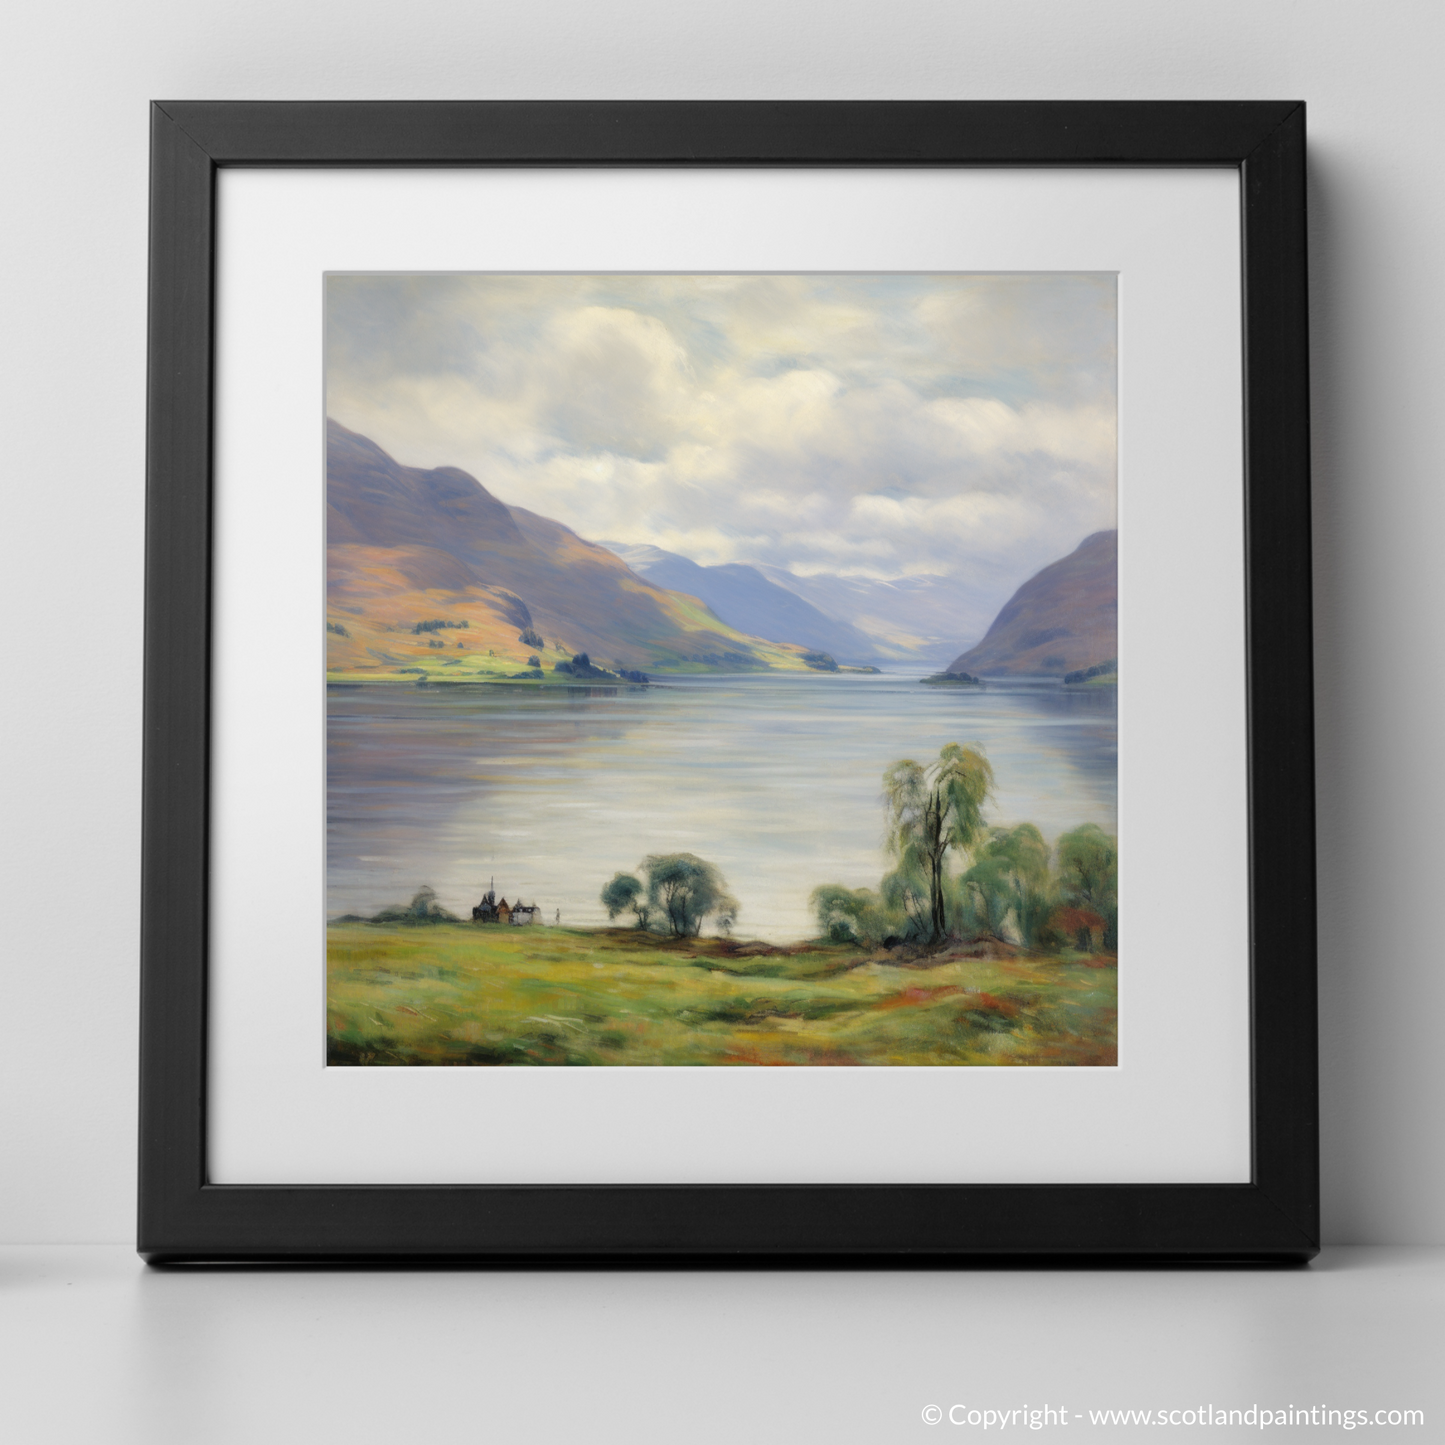 Highland Serenity: A Dance of Light and Colour at Loch Linnhe